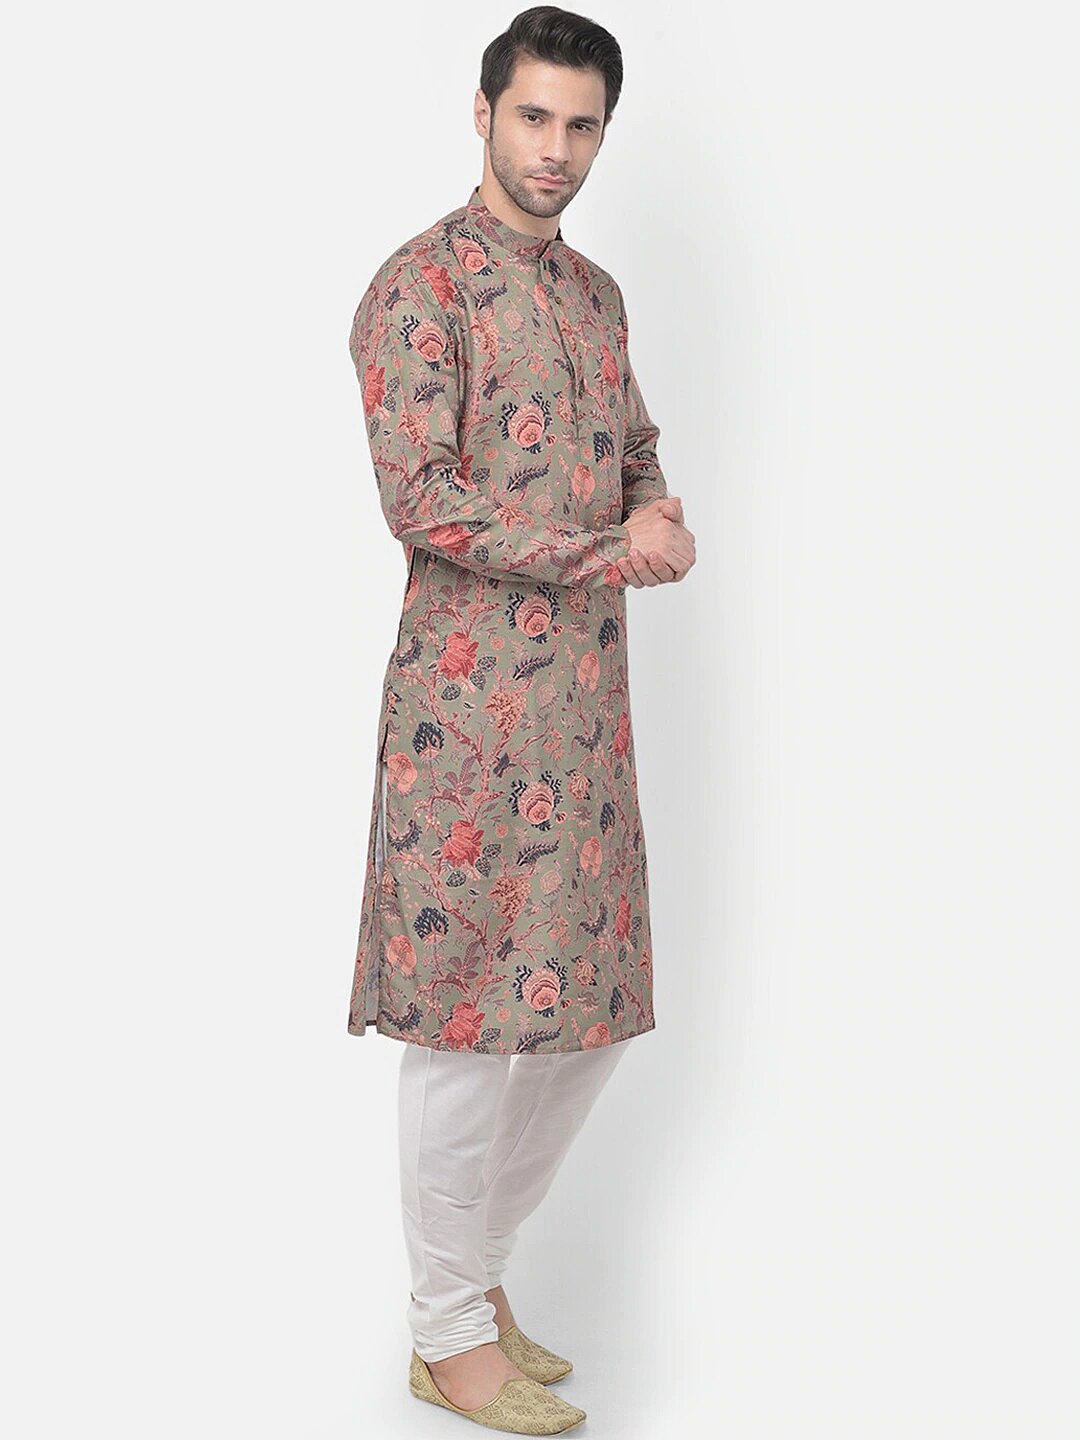 Taupe Floral Khadi Kurta Indian Clothing in Denver, CO, Aurora, CO, Boulder, CO, Fort Collins, CO, Colorado Springs, CO, Parker, CO, Highlands Ranch, CO, Cherry Creek, CO, Centennial, CO, and Longmont, CO. NATIONWIDE SHIPPING USA- India Fashion X